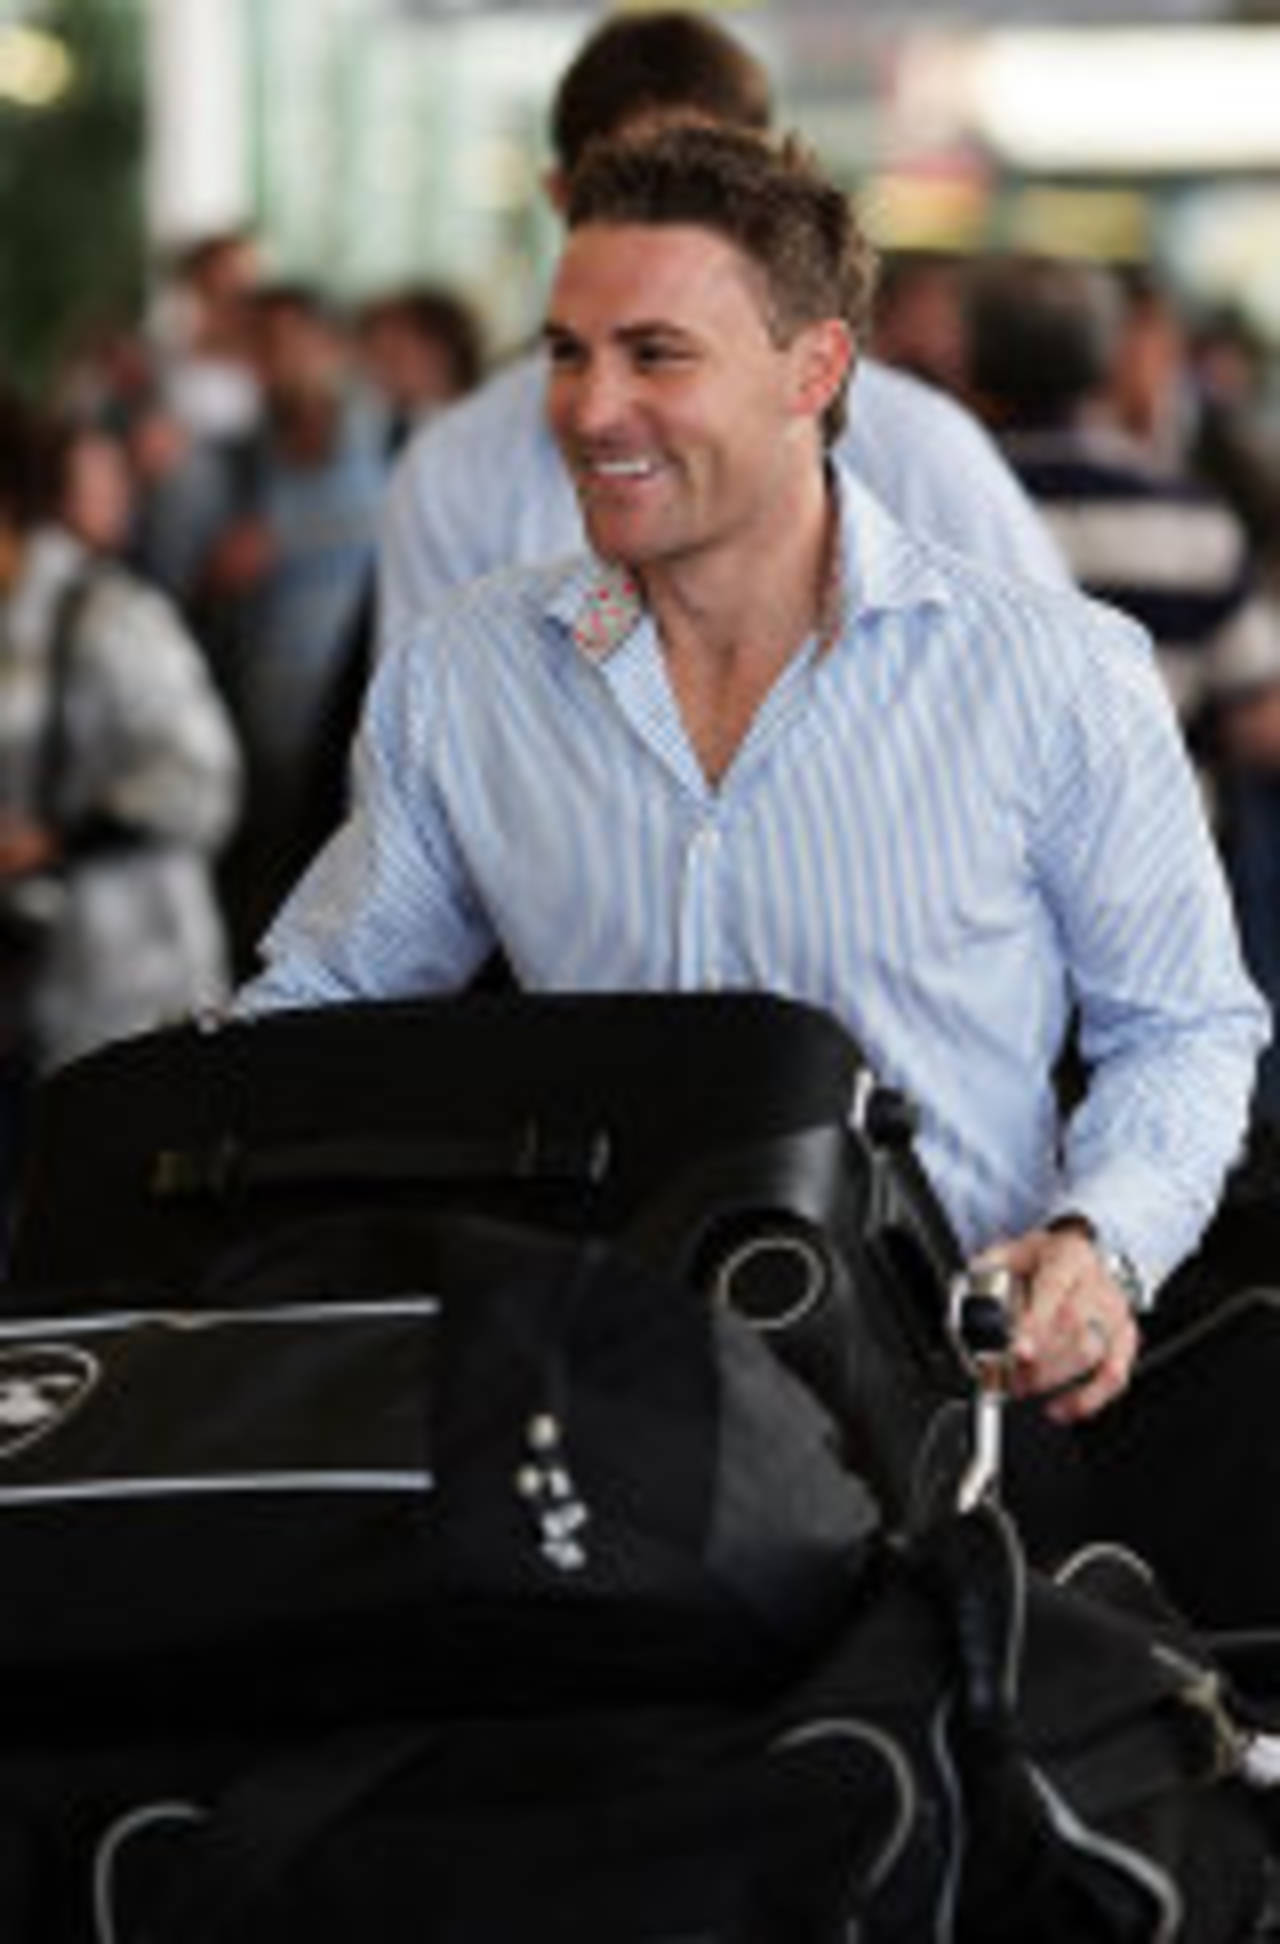 Brendon McCullum wheels in his luggage at the airport, Auckland, October 27, 2009